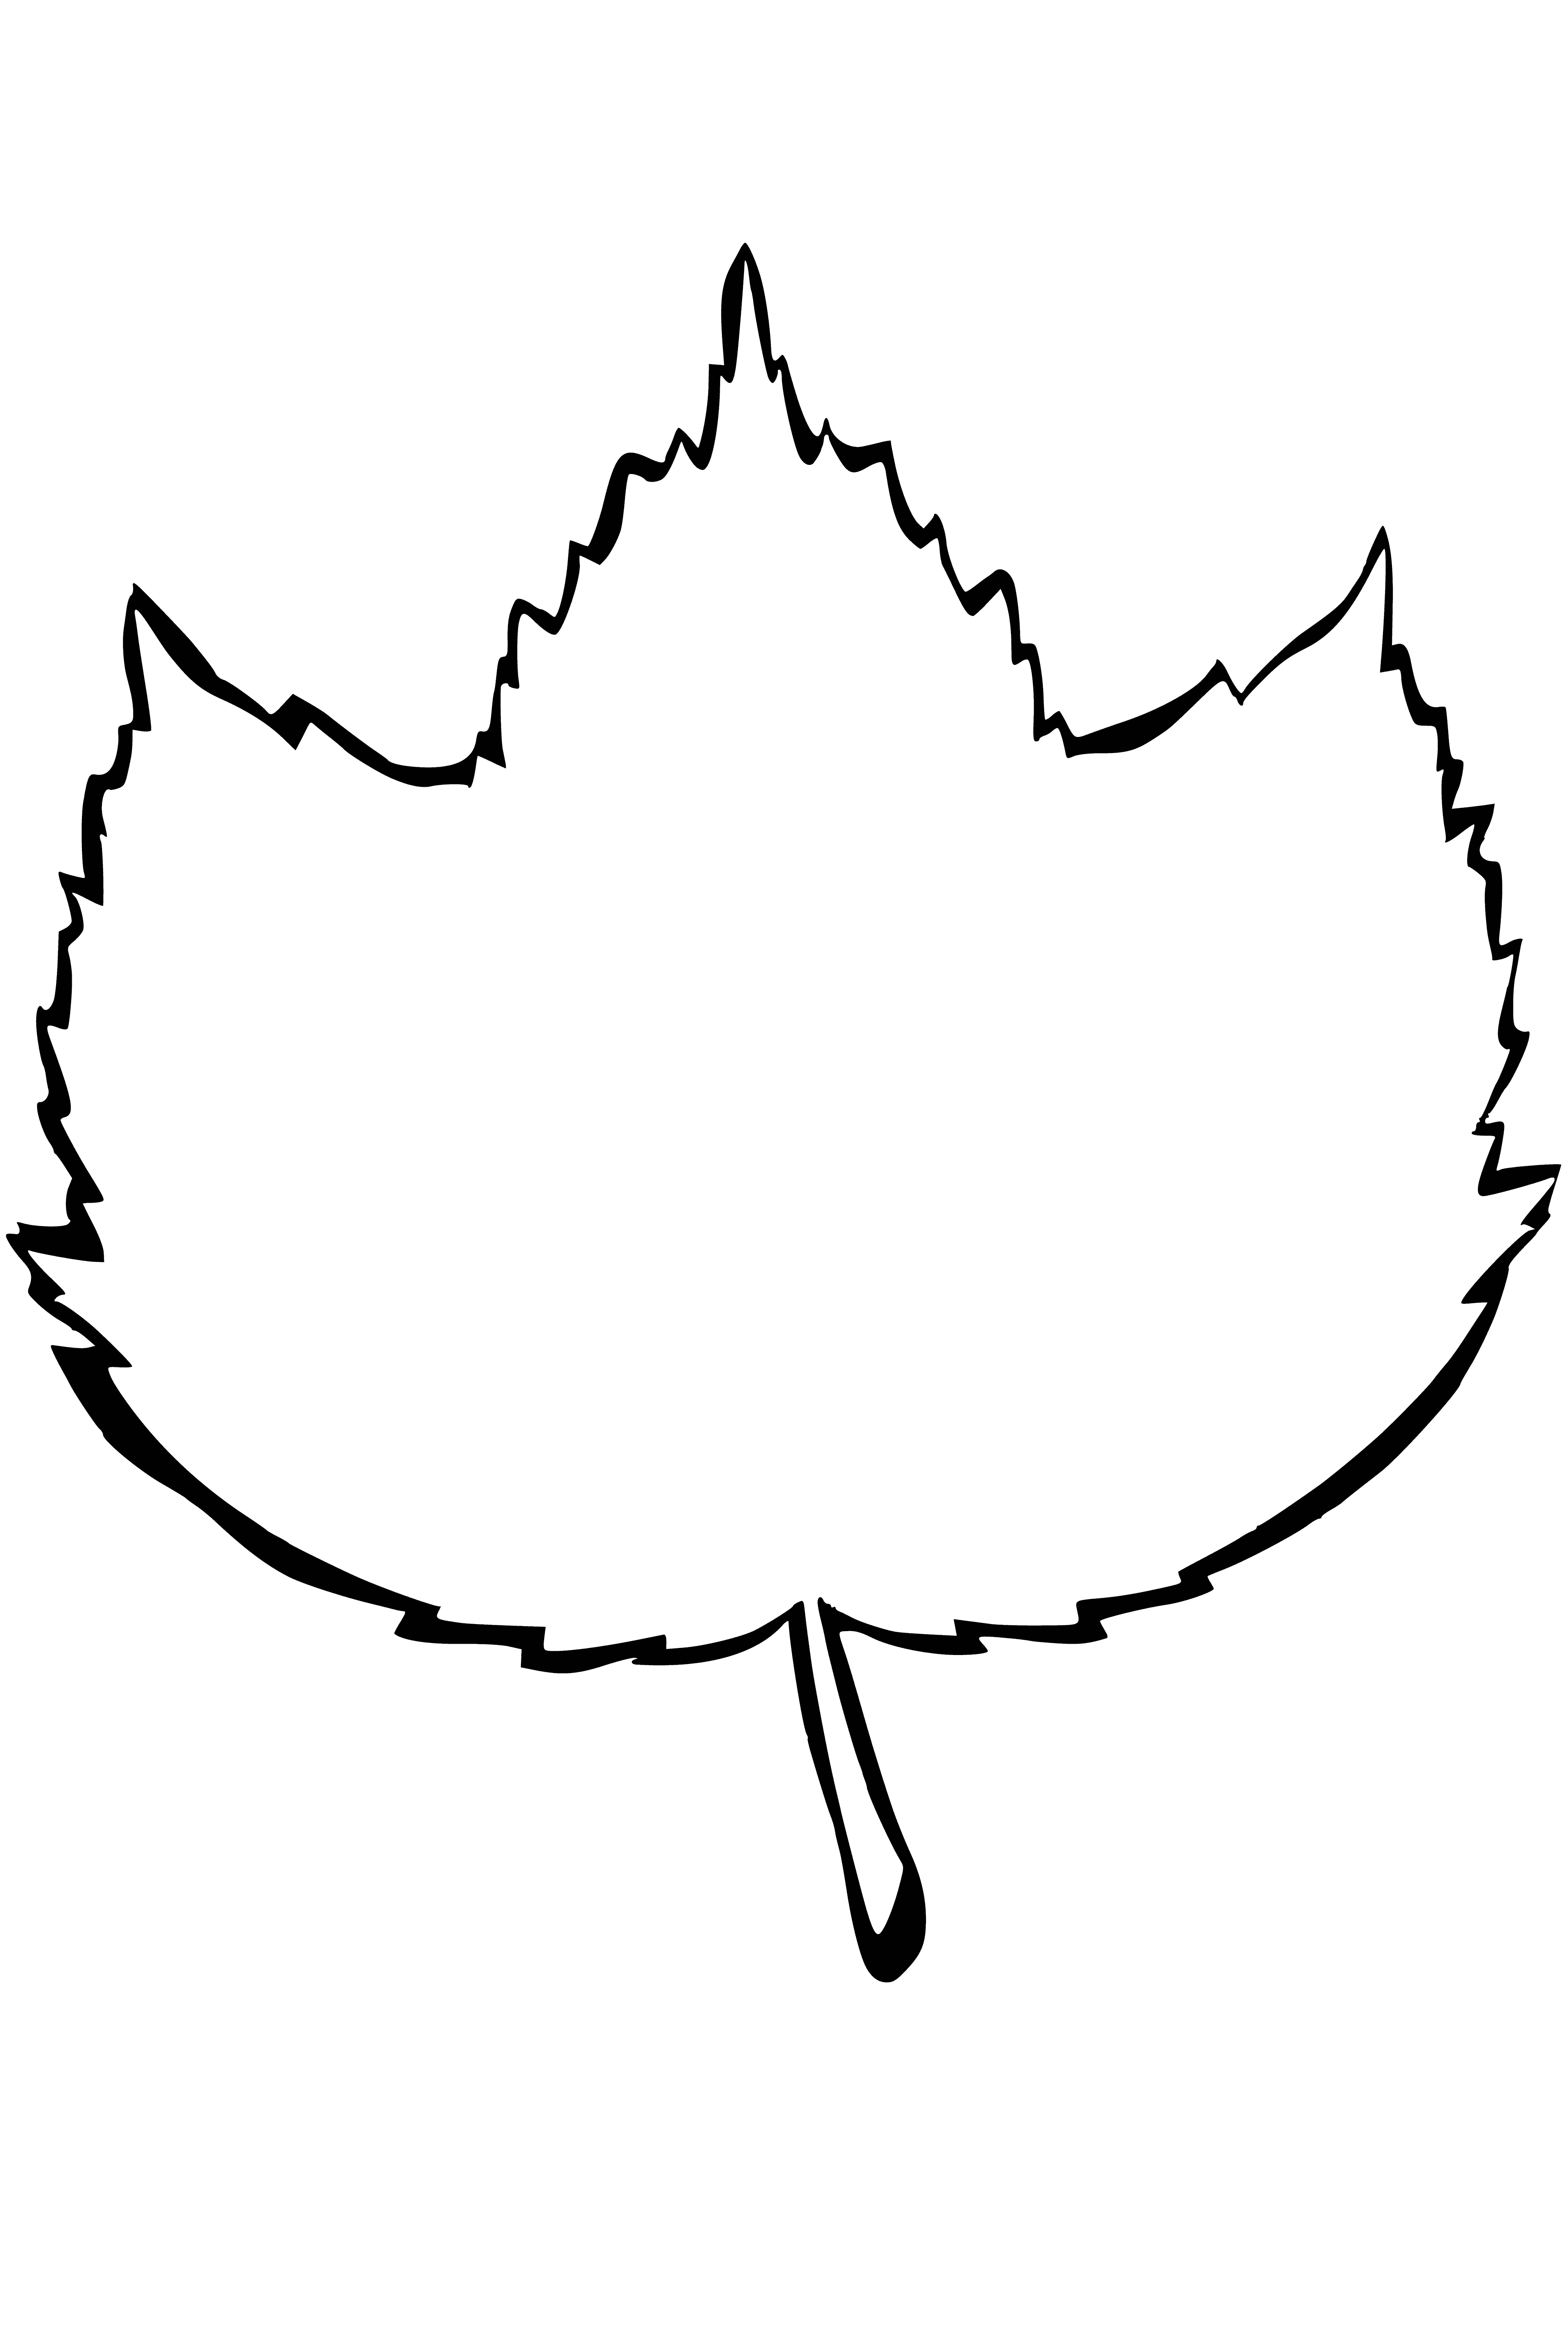 Striped maple coloring page